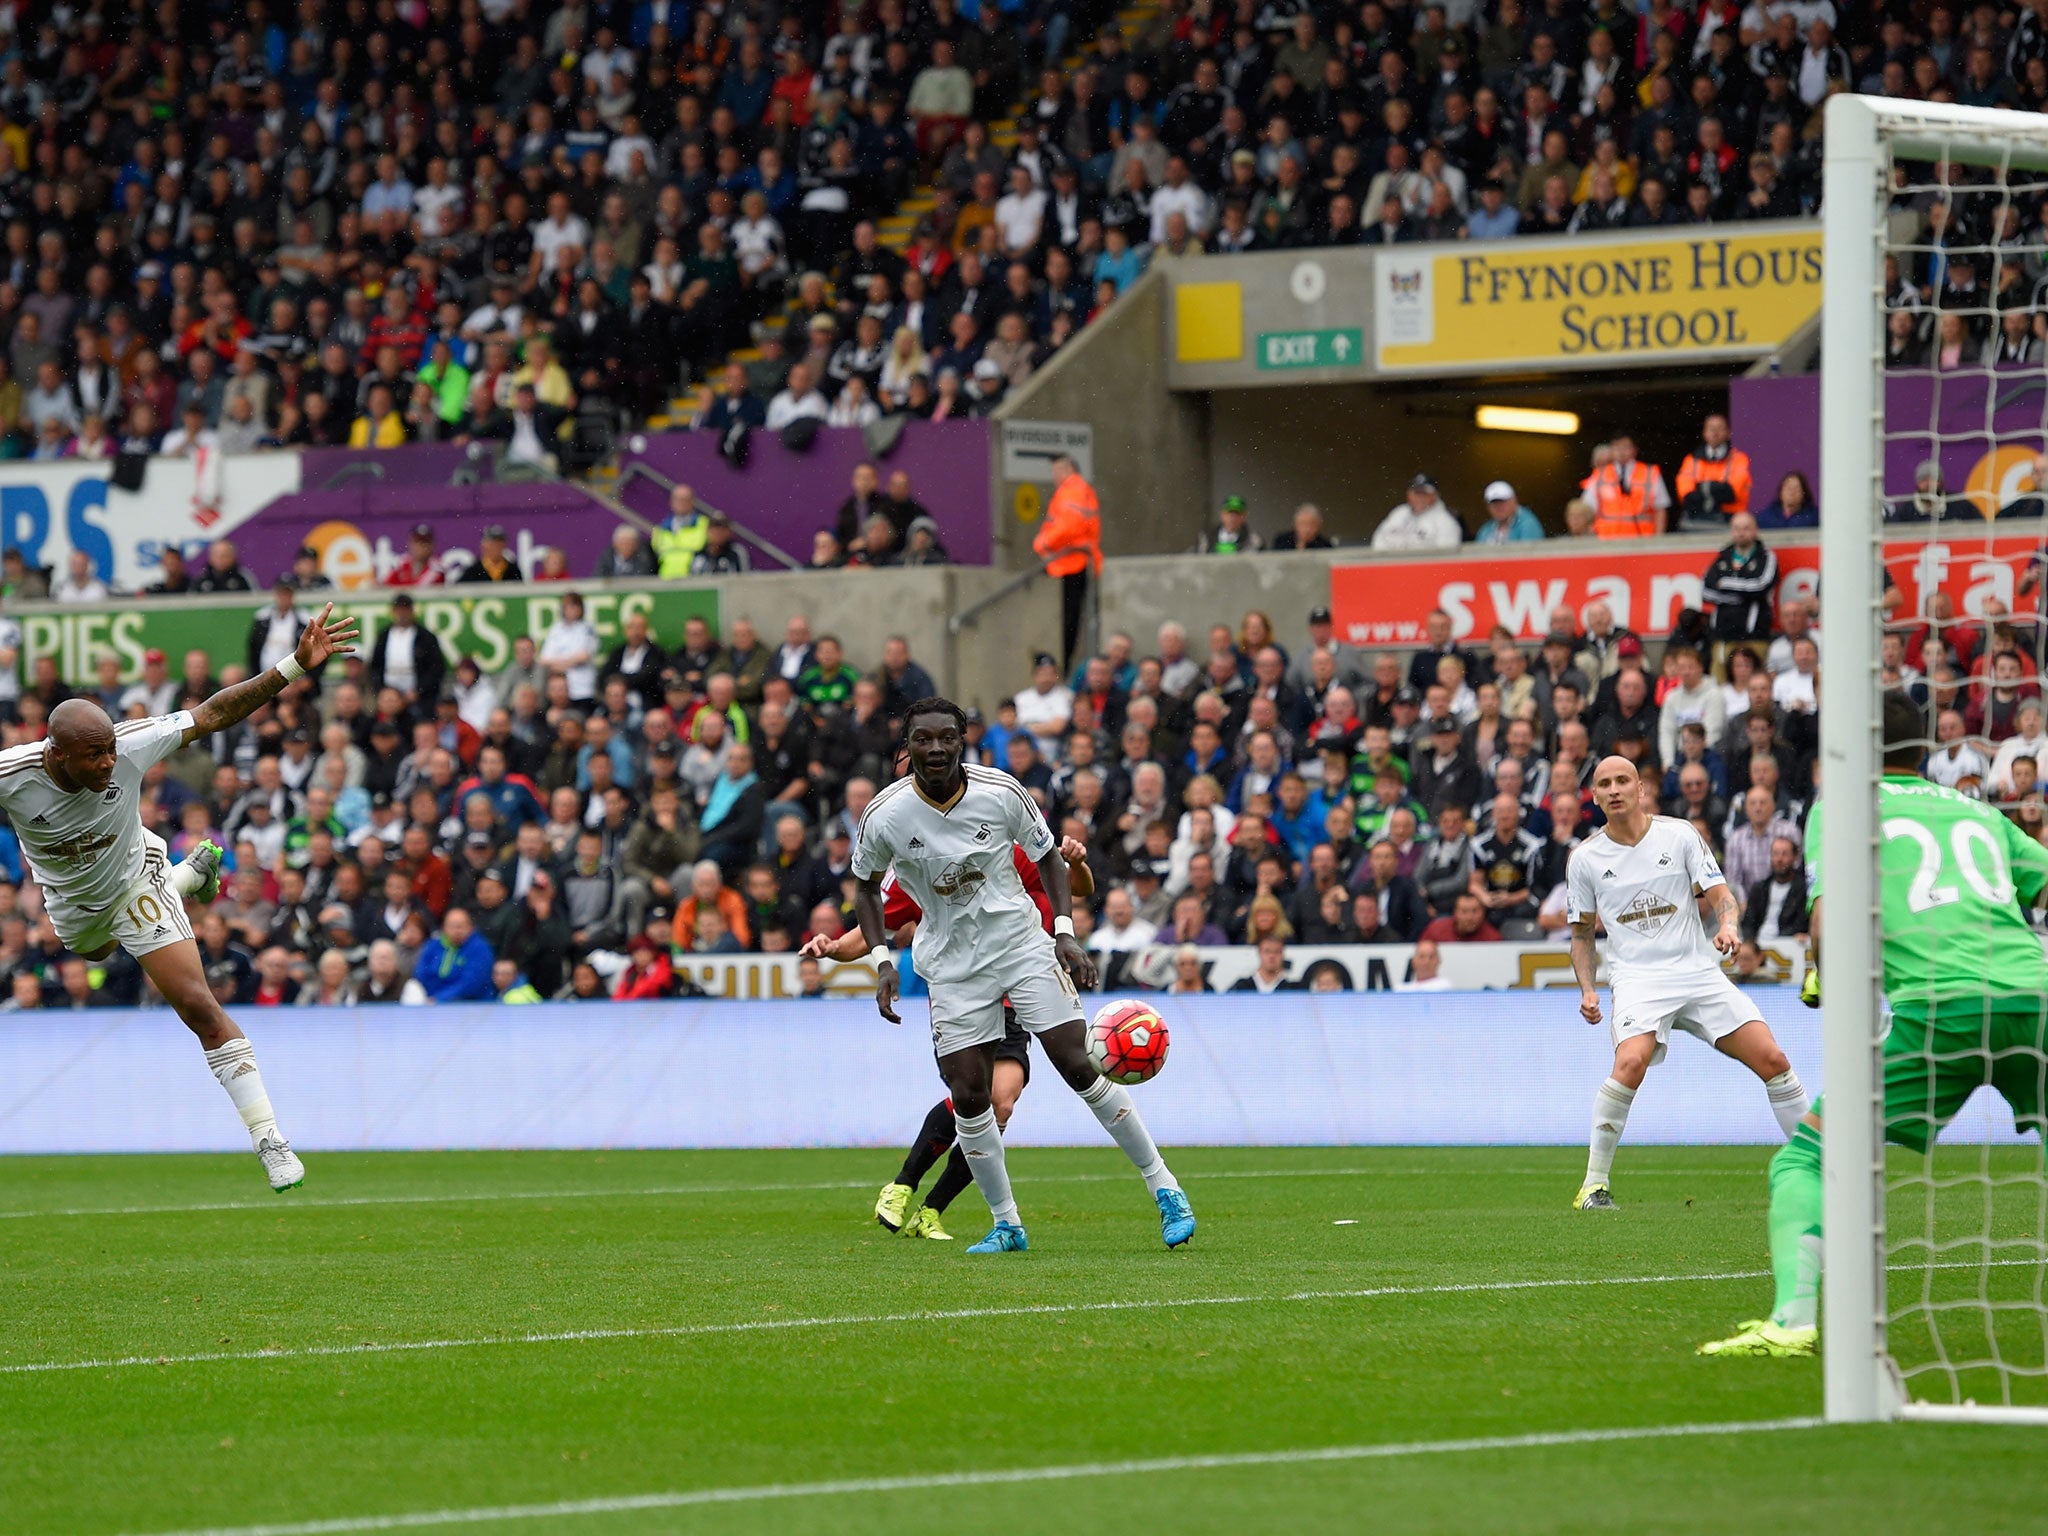 Andre Ayew heads in Swansea's equaliser